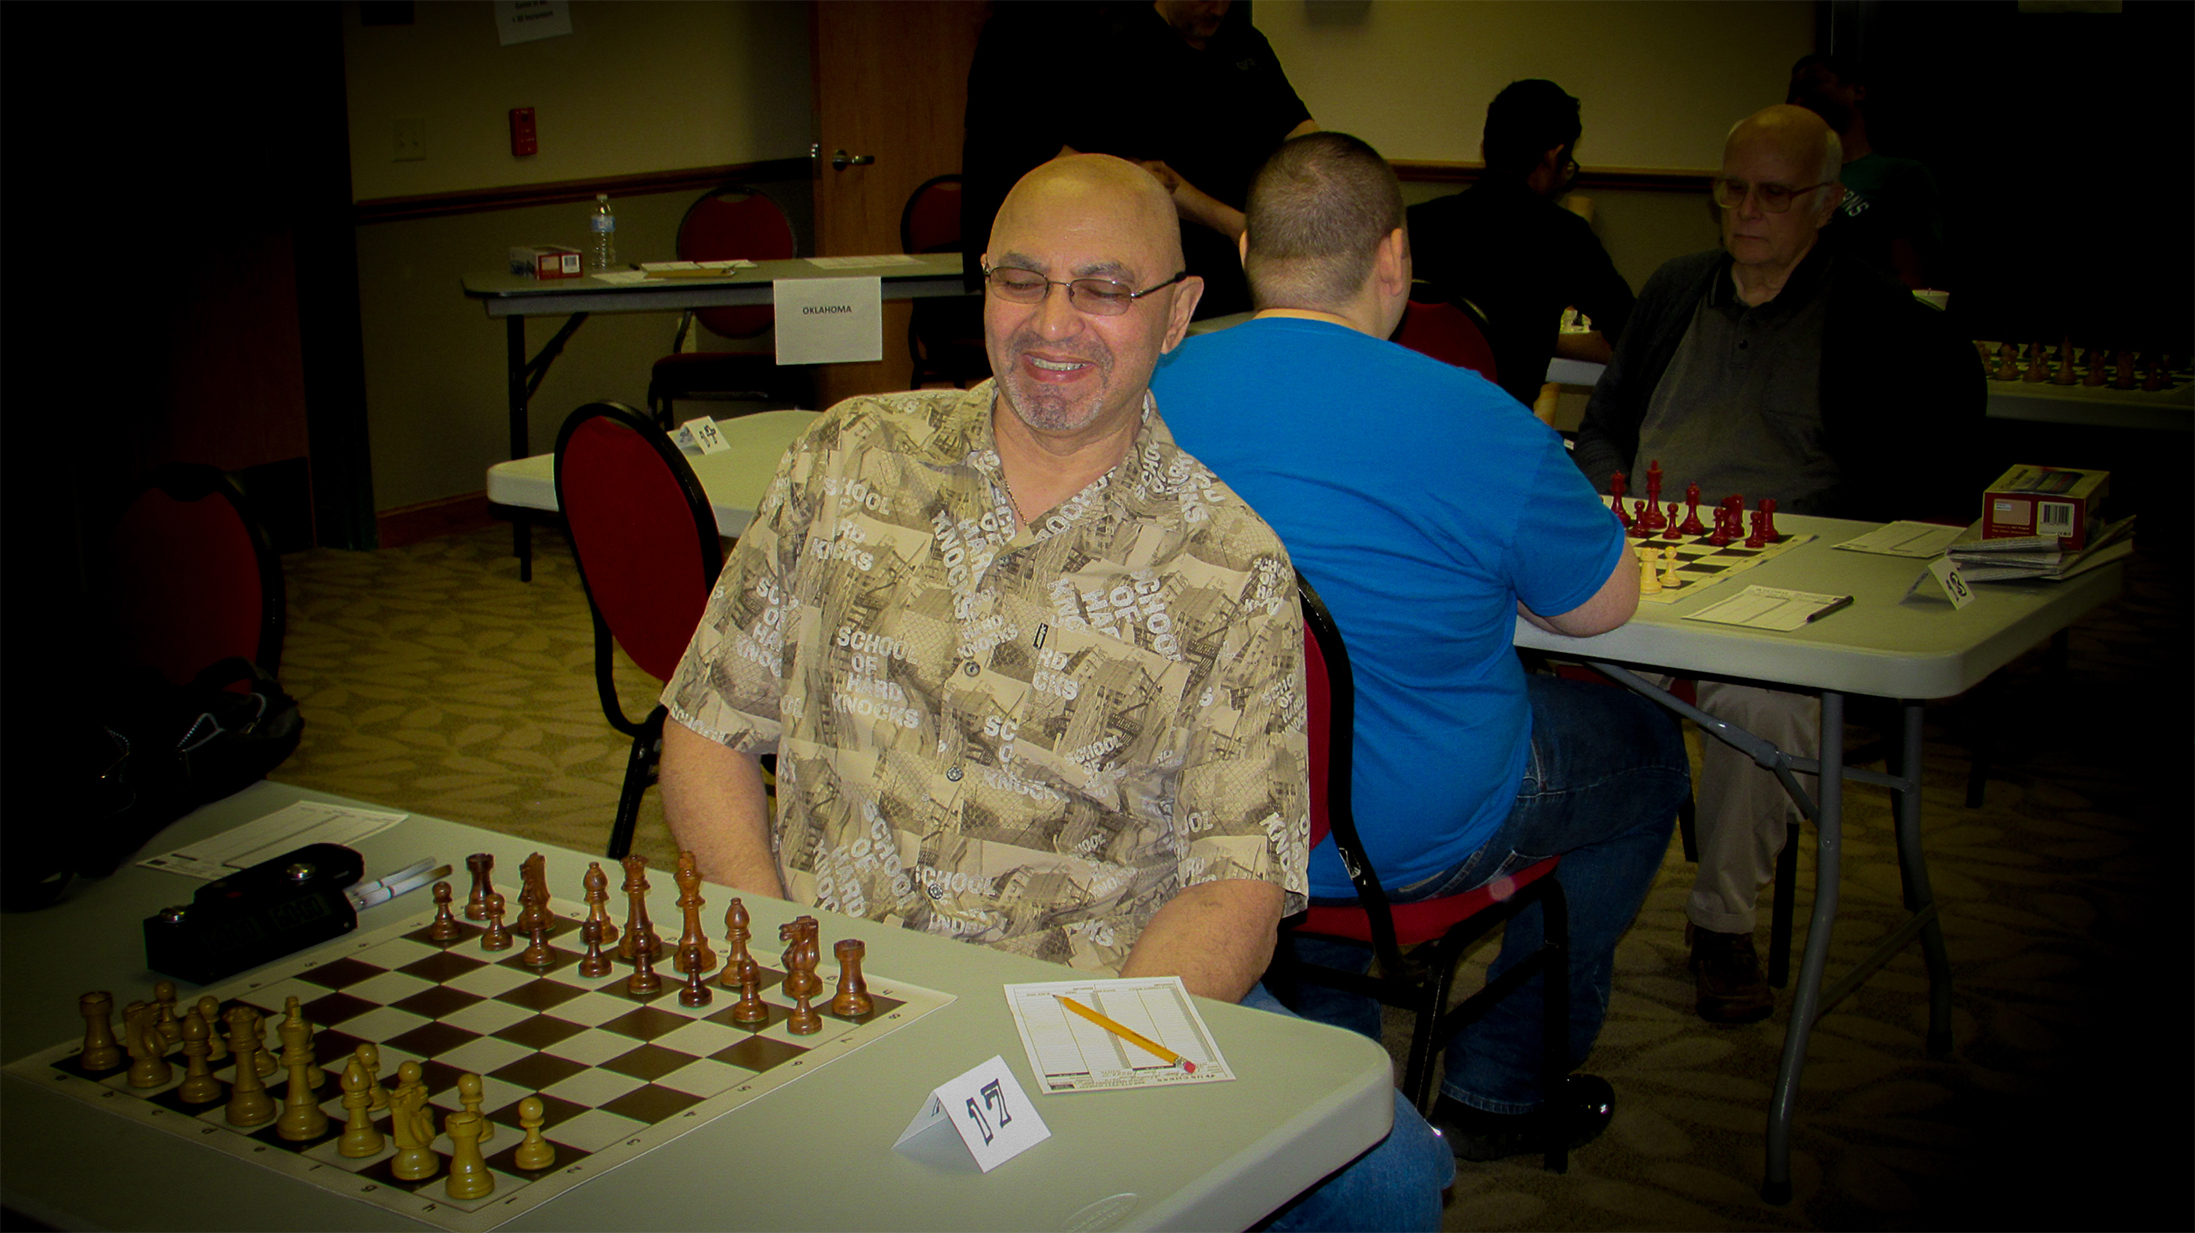 Playing in his second RRSO, Jimmy Nazario waits on Board 17.  Mr. Nazario is ranked in the 76th Percentile for all USA chess players.  In Oklahoma he is ranked in the Top 100 at Number 89.  Photo by Mike Tubbs.